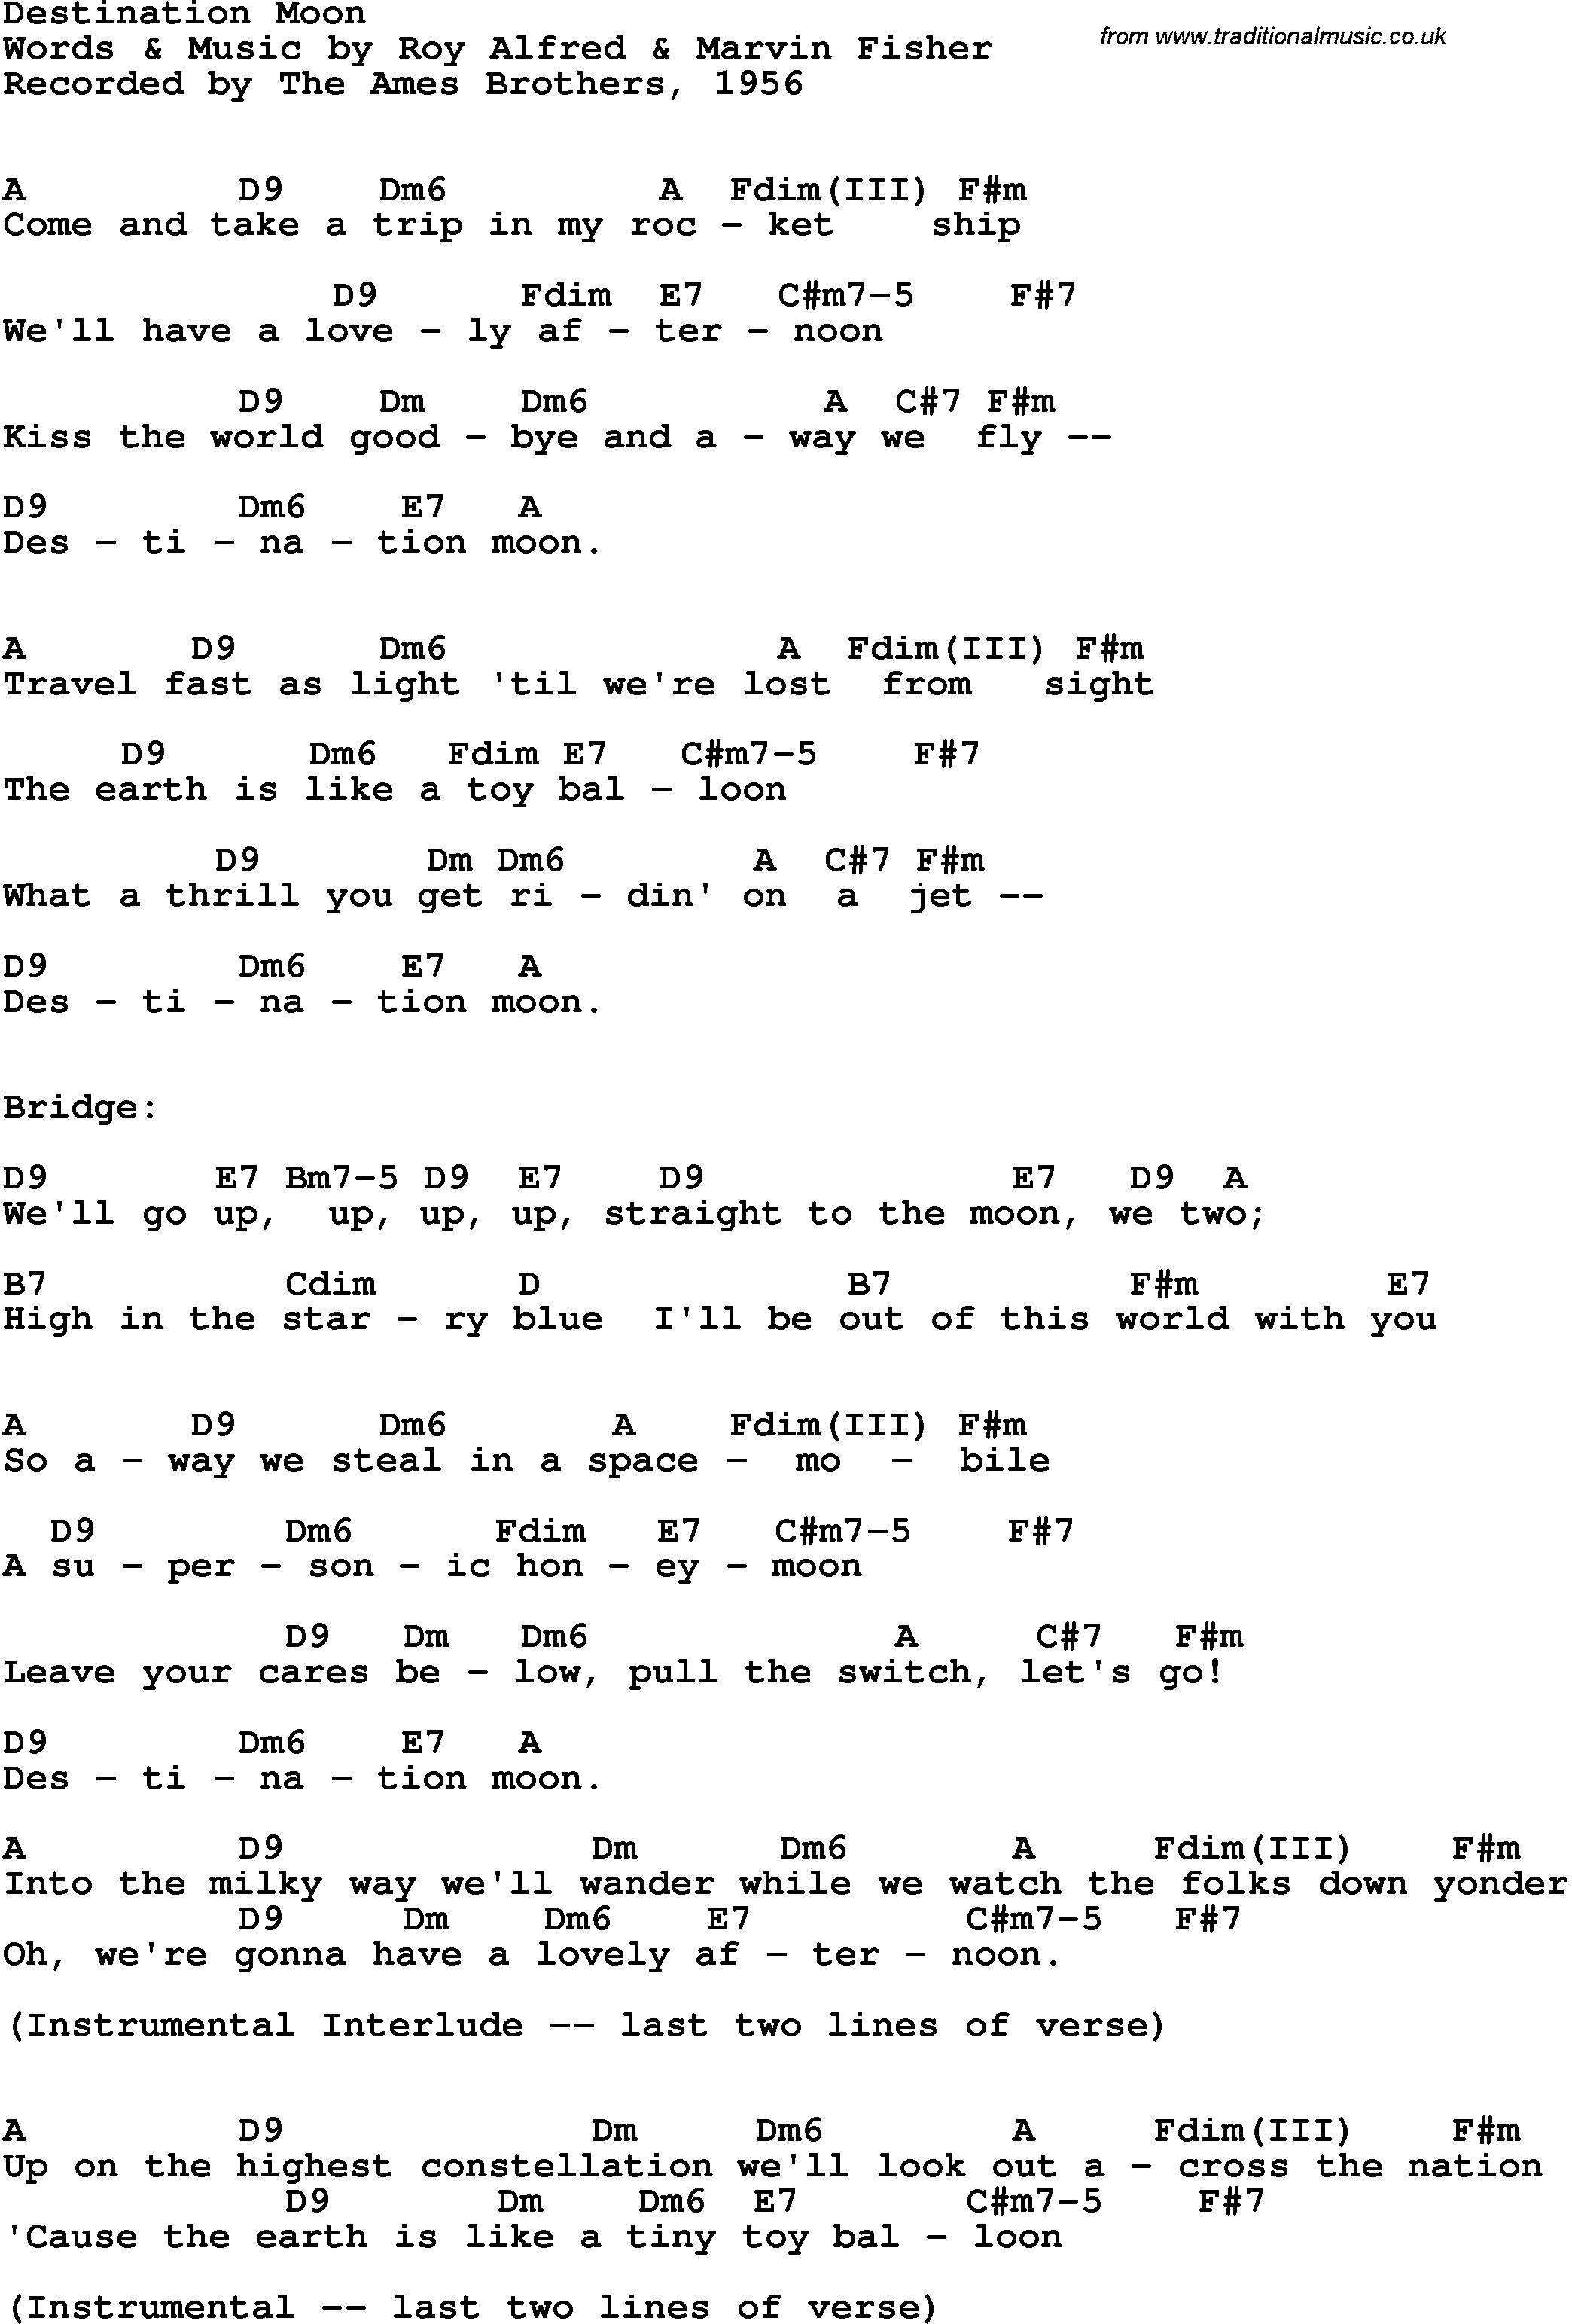 Song Lyrics with guitar chords for Destination Moon - The Ames Brothers, 1956